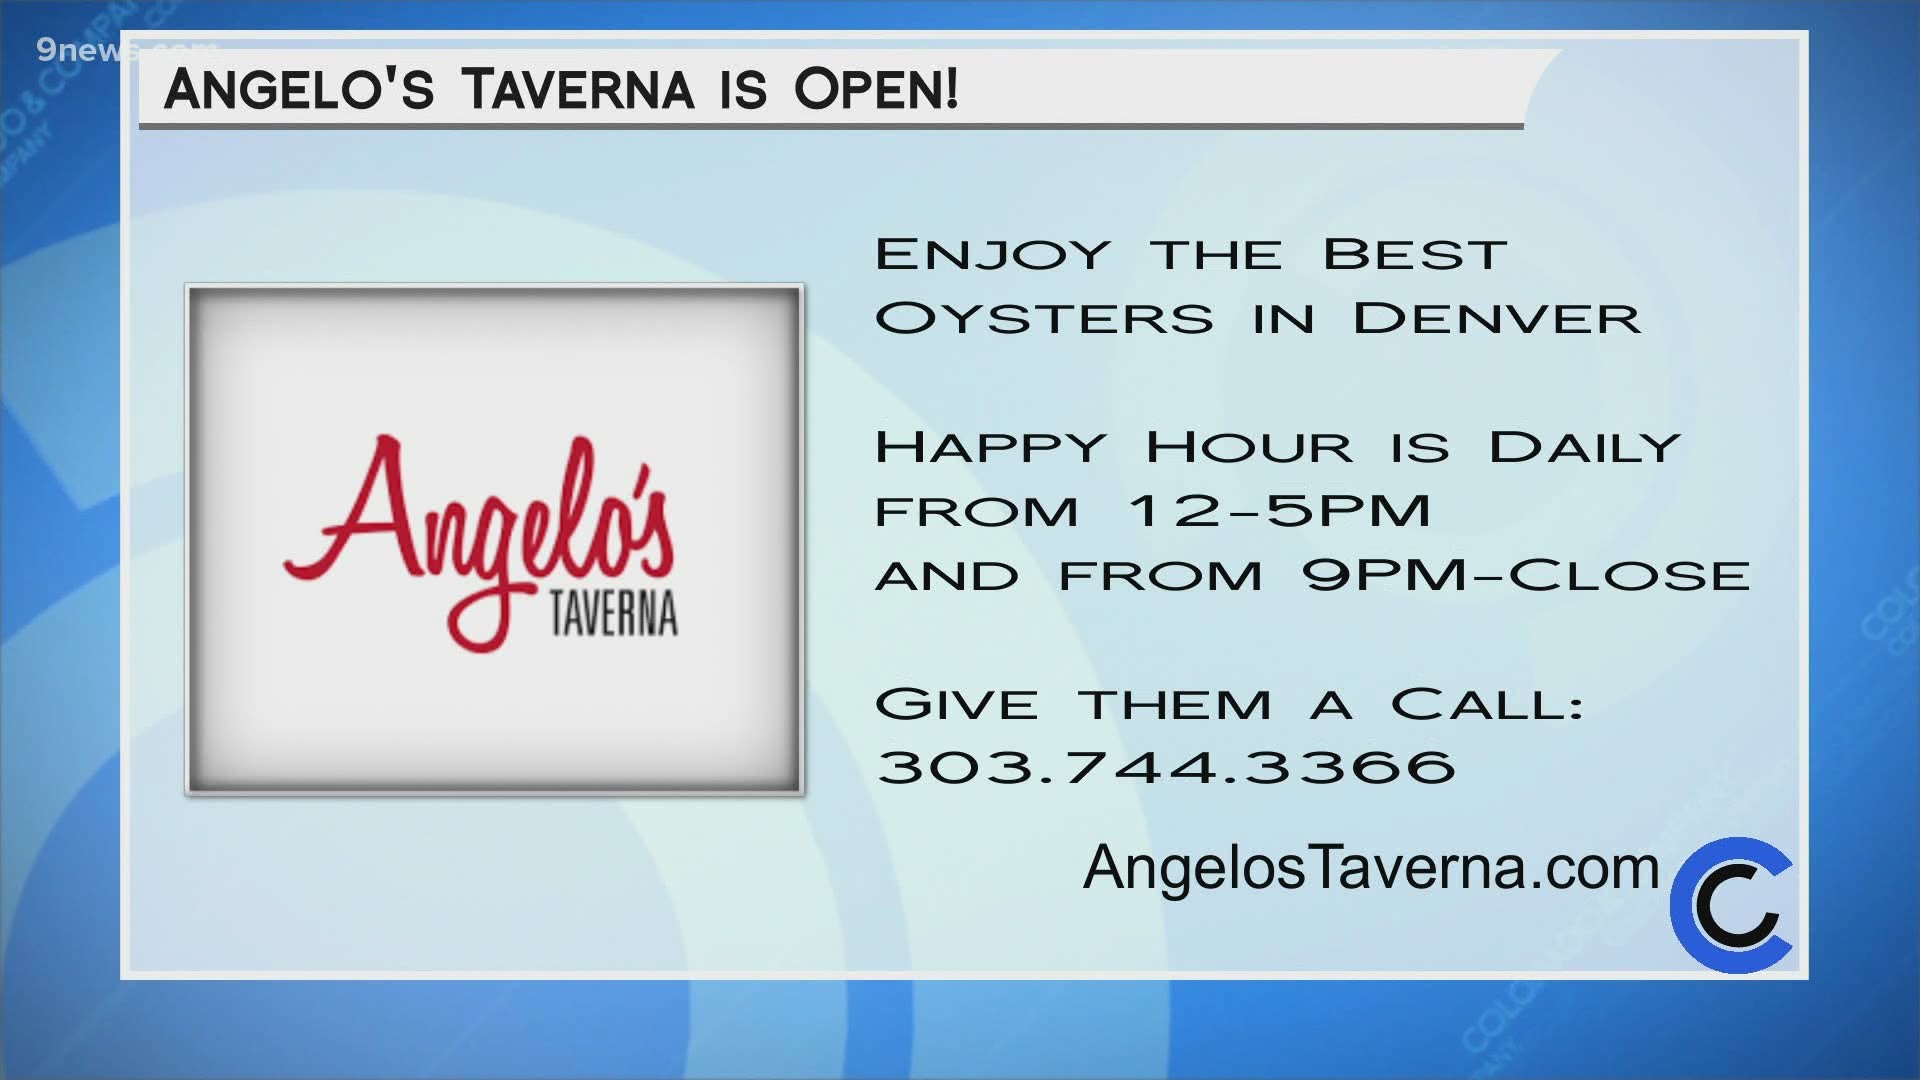 Stop by Angelo's to get the best oysters in town, as well as the rest of their amazing menu. Check it out at AngelosTaverna.com.